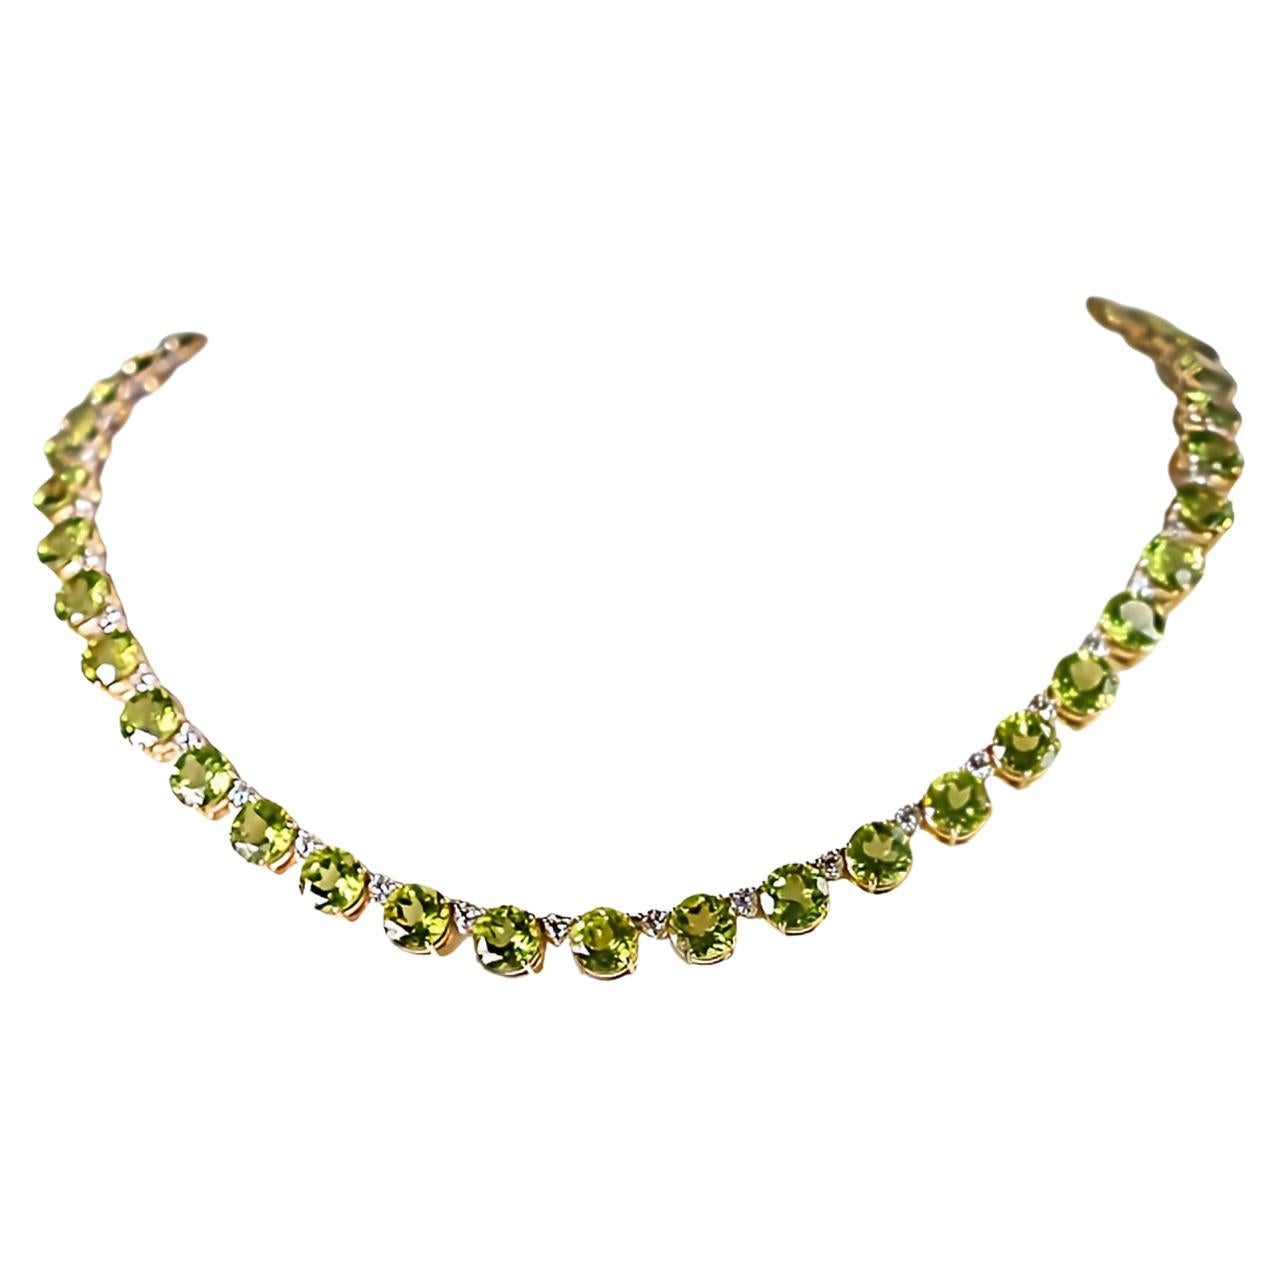 Nature's Palette: Elegant Necklace with White Diamonds and Peridot Greens